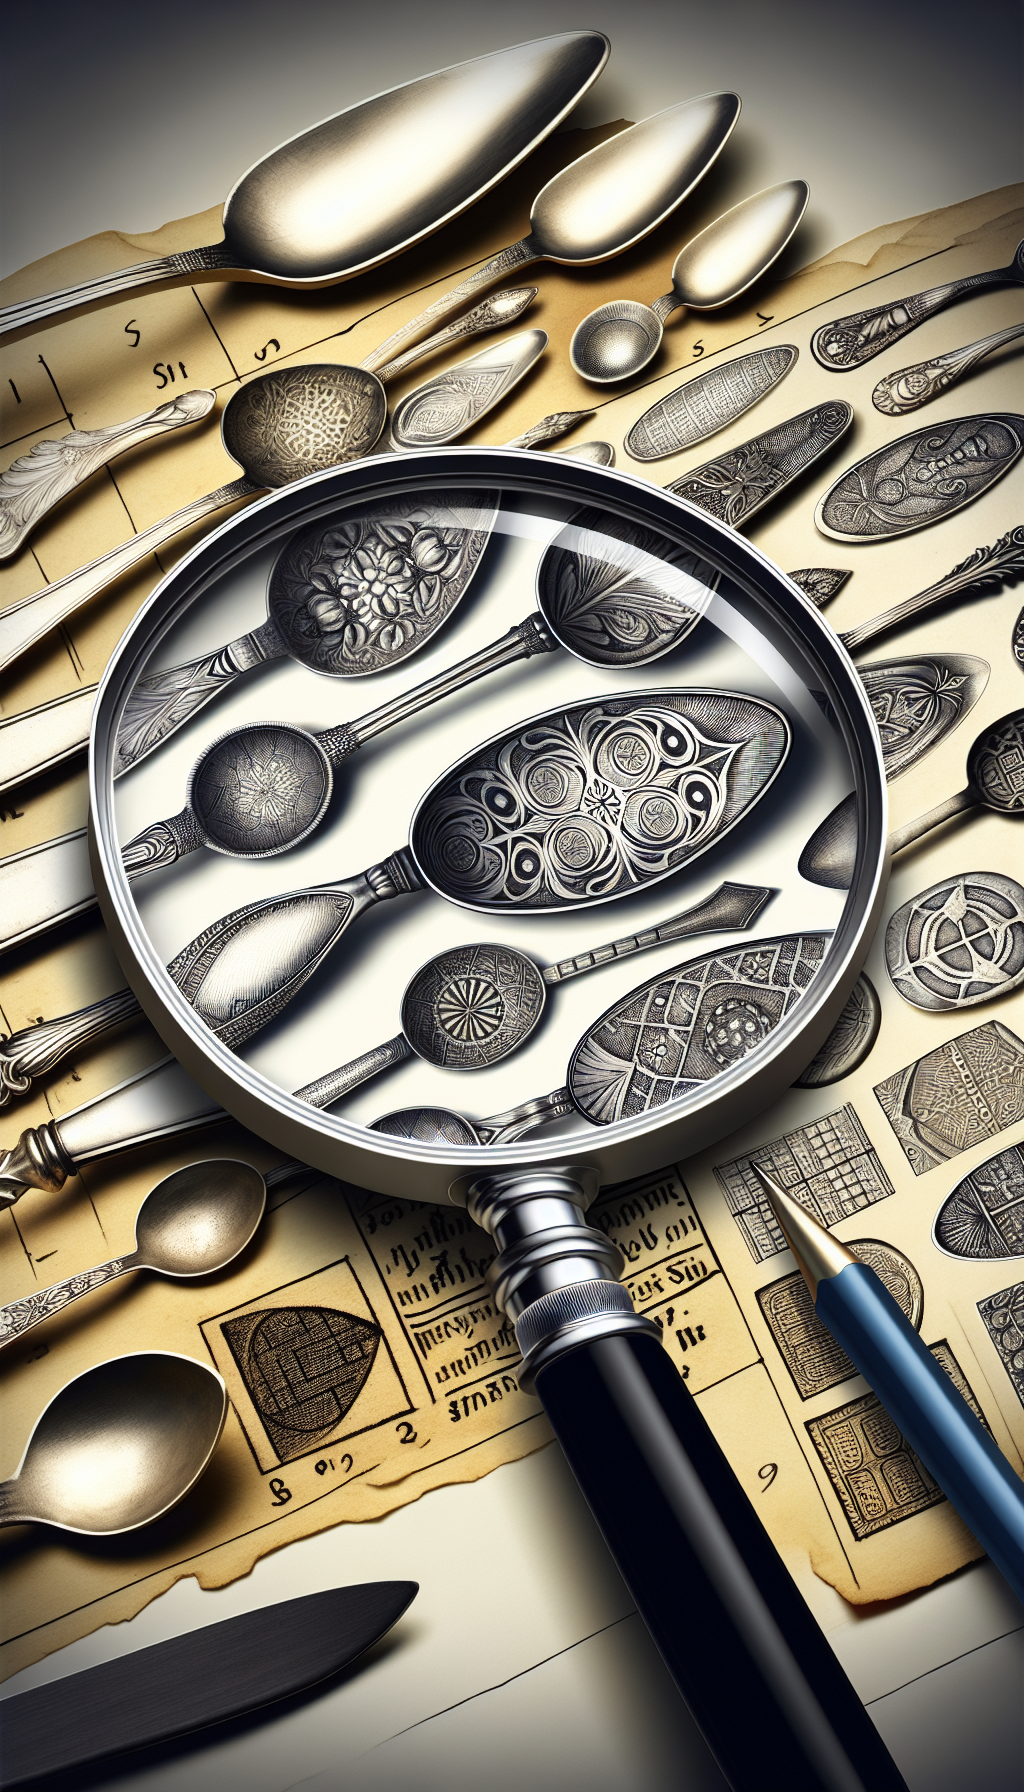 In the illustration, a magnifying glass reveals intricate patterns and hallmarks etched on the surfaces of overlapping antique silver spoons, which transition in style from line drawings to photorealistic, and finally into abstract representations, symbolizing a deep dive into their history and origins, with whispers of text denoting famous makers' marks in the background.